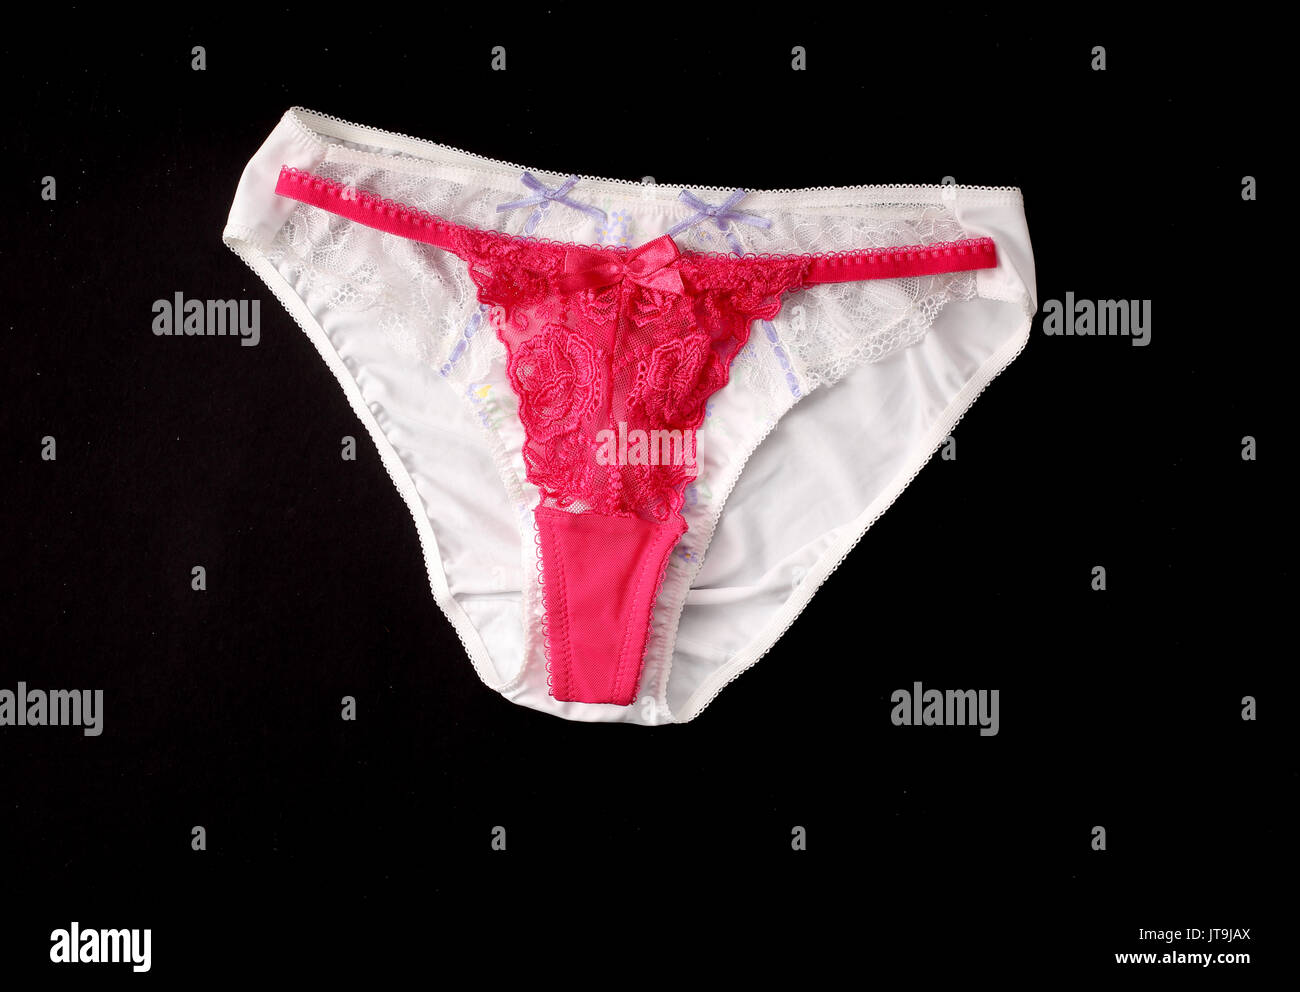 Granny panties and thong briefs taken on black background Stock Photo -  Alamy